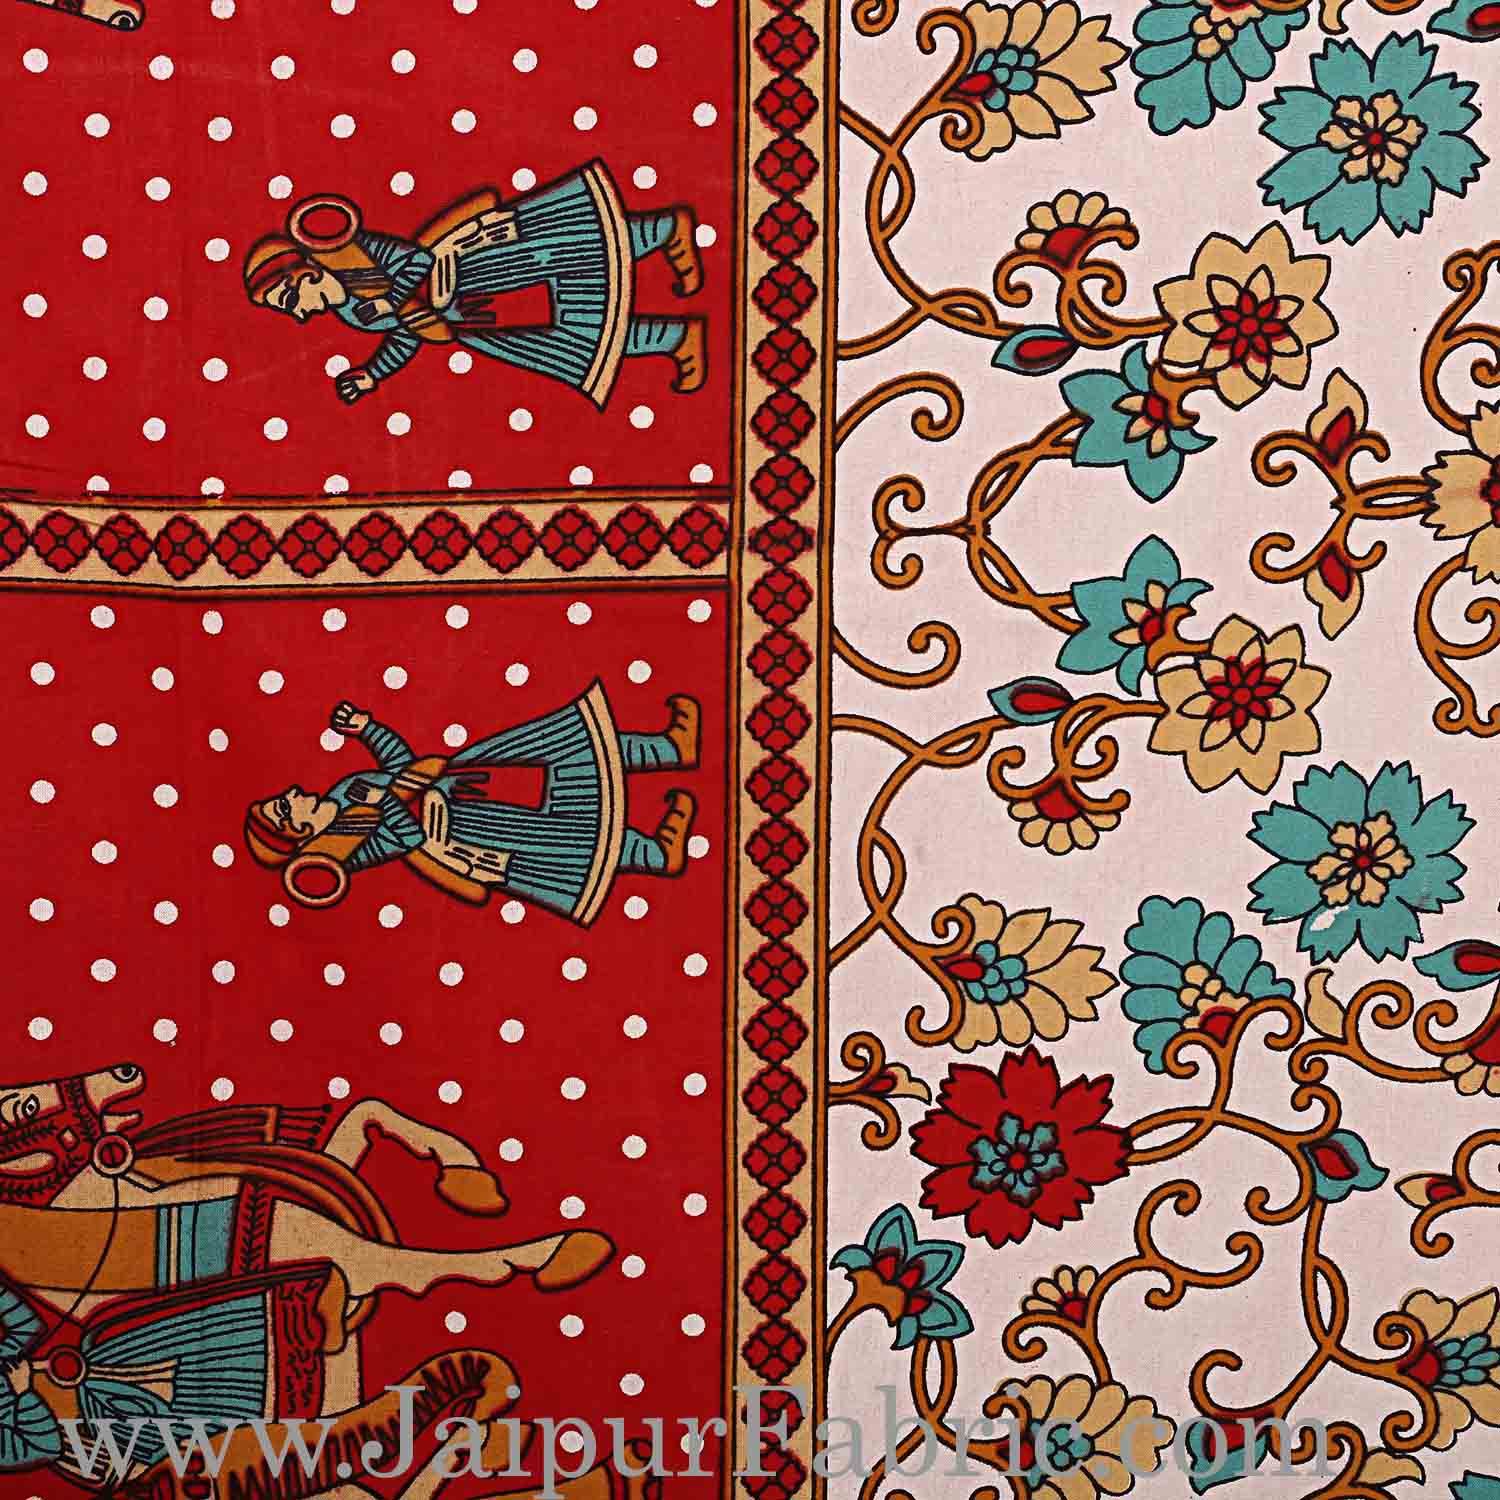 Double Bedsheet Maroon Border Gangaur Print Fine Cotton With Two Pillow Cover